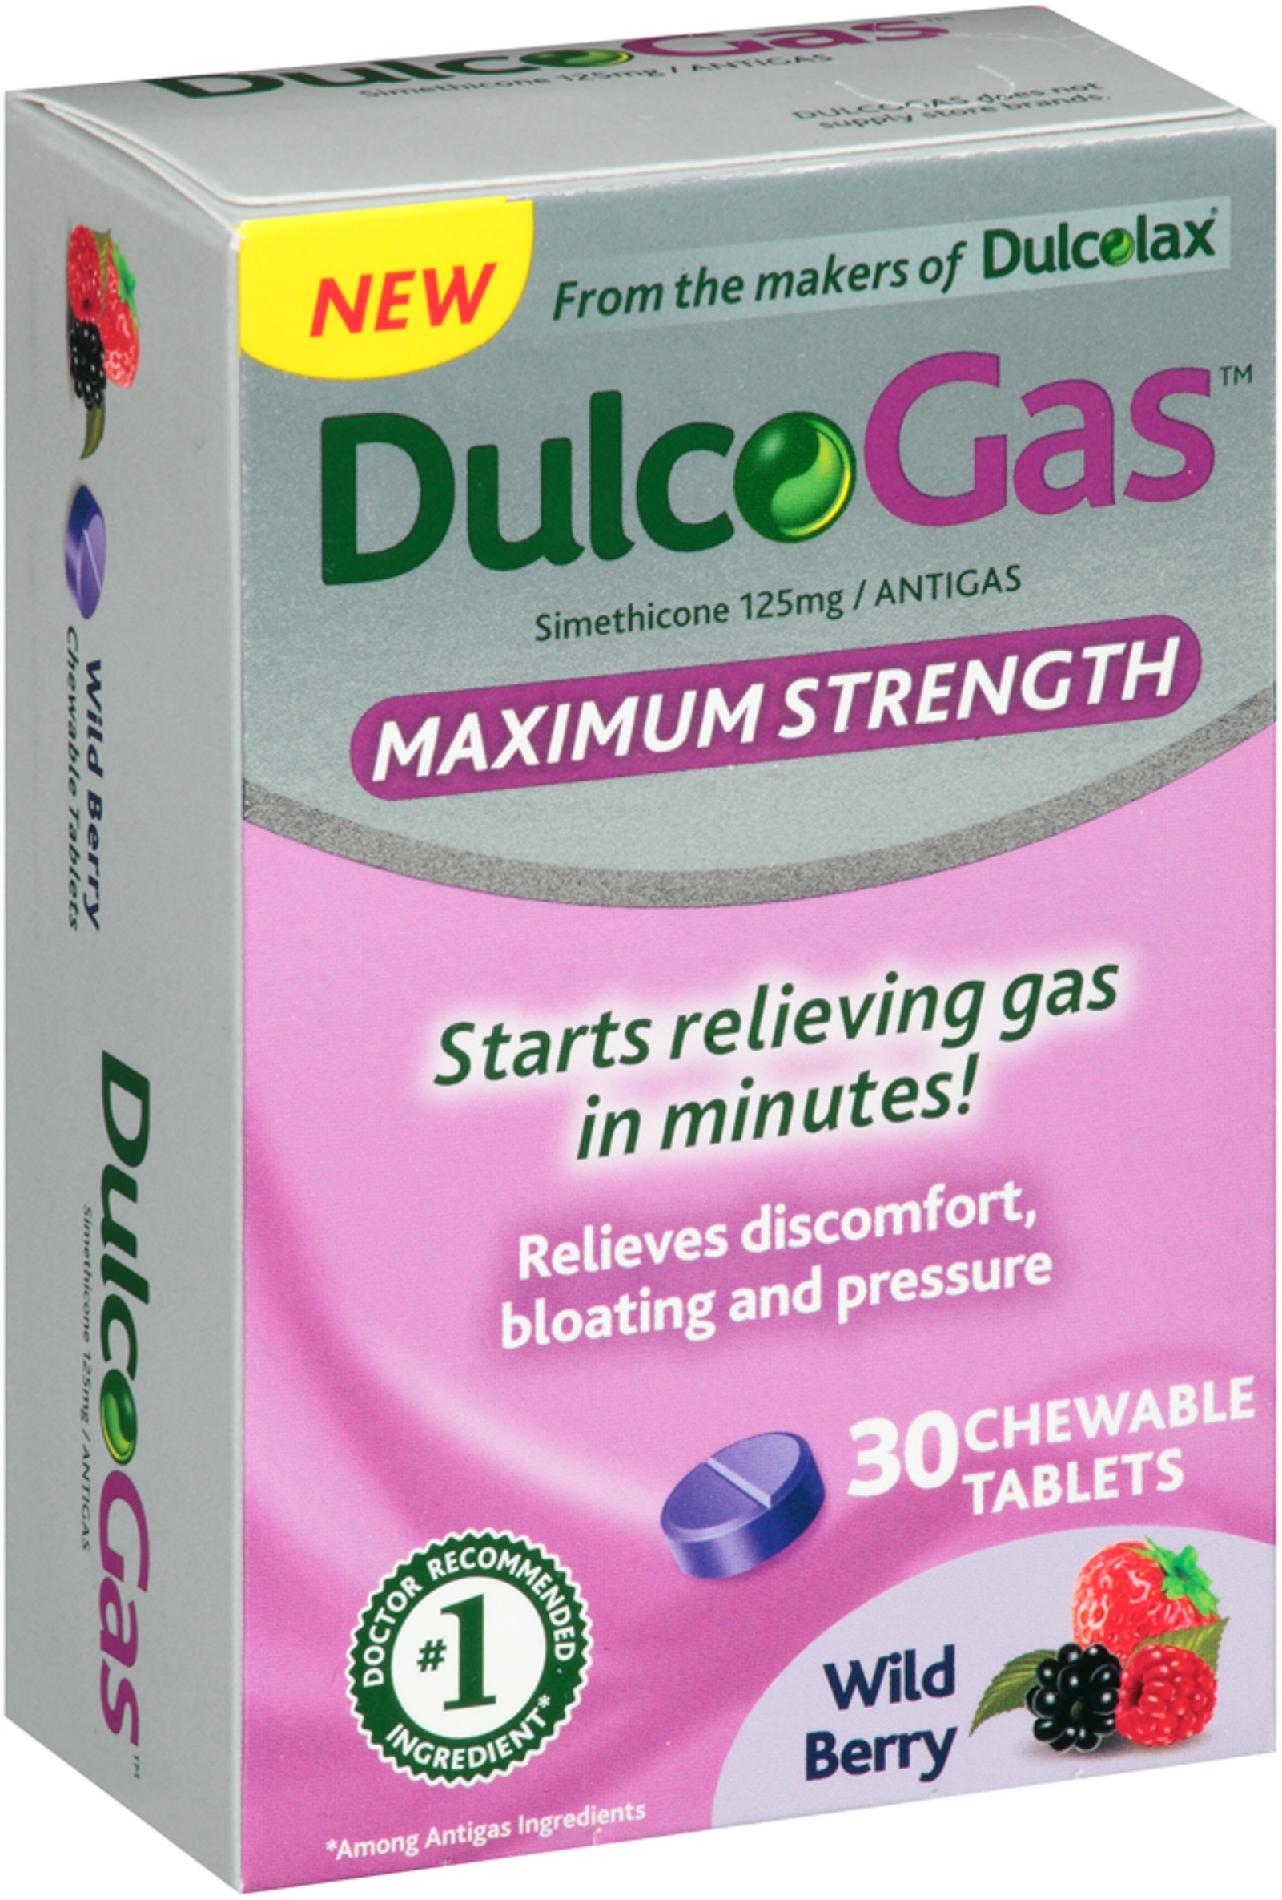 FREE DulcoGas Chewable Tablets at Target